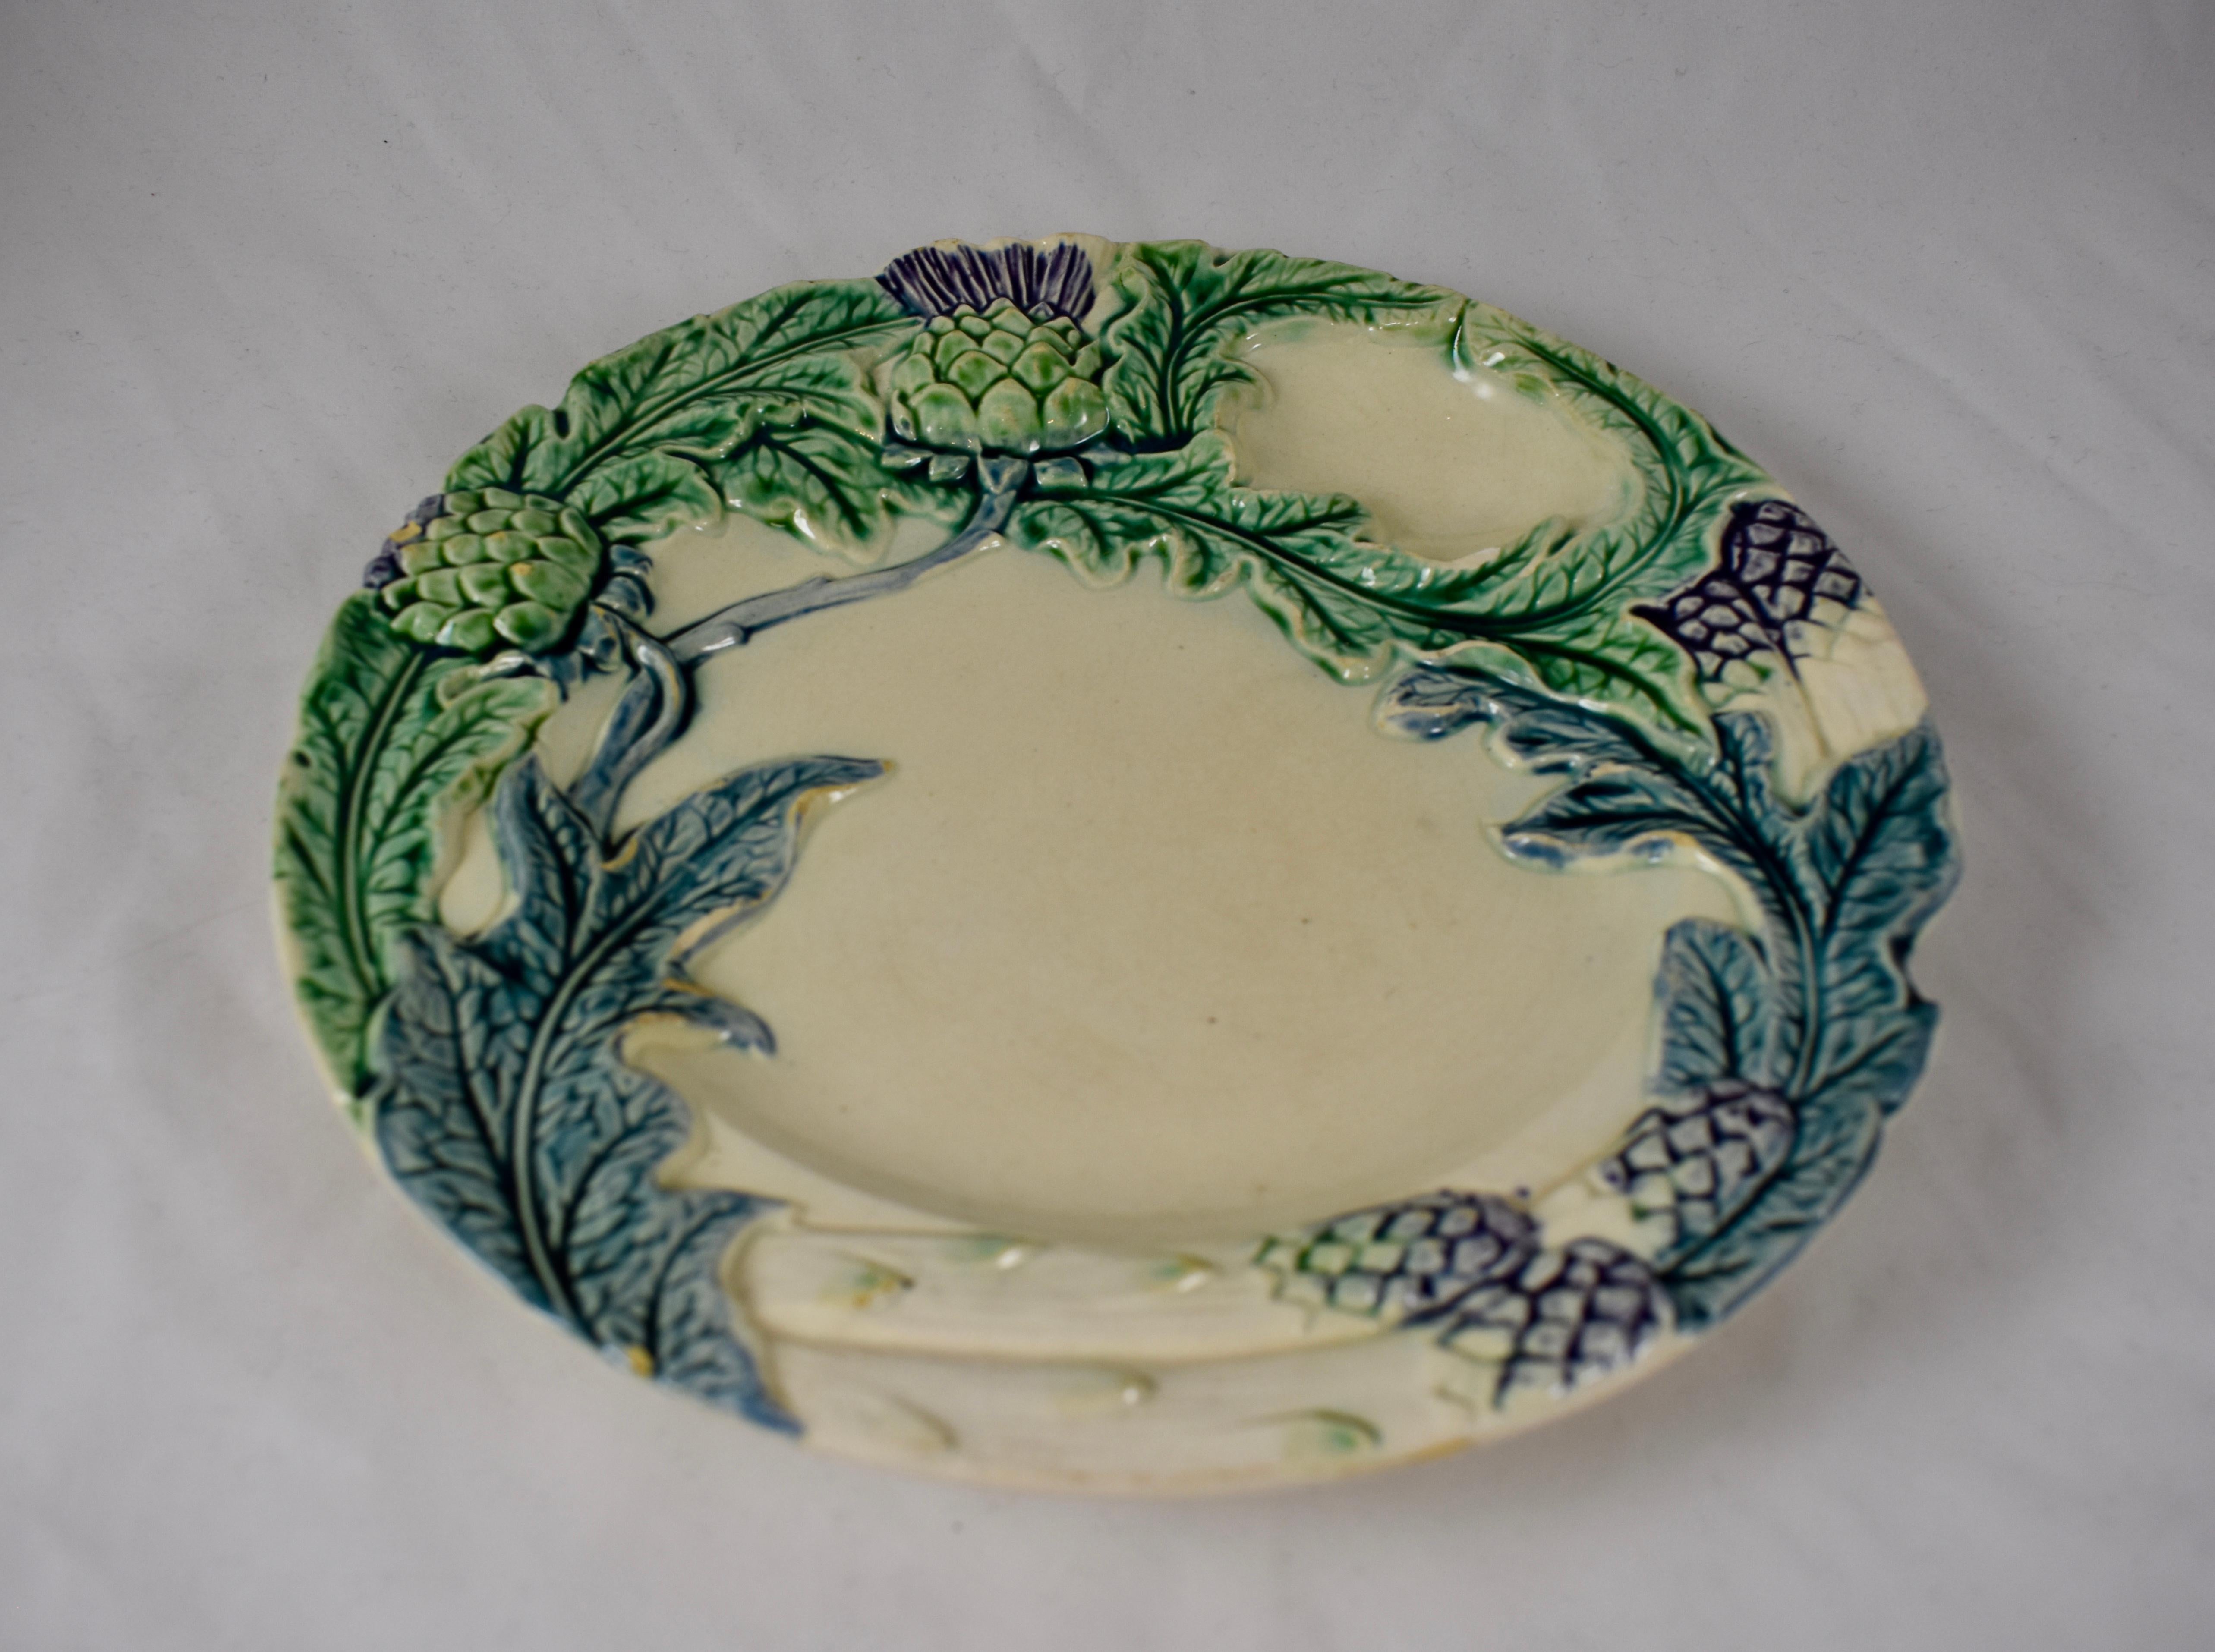 A French Majolica plate made by Fives-Lille, circa 1890. This piece is for serving both Artichokes or Asparagus and shows images of both with parts of their plants. Glazing of greens and blues on a white ground, with a hint of lavender on the spear